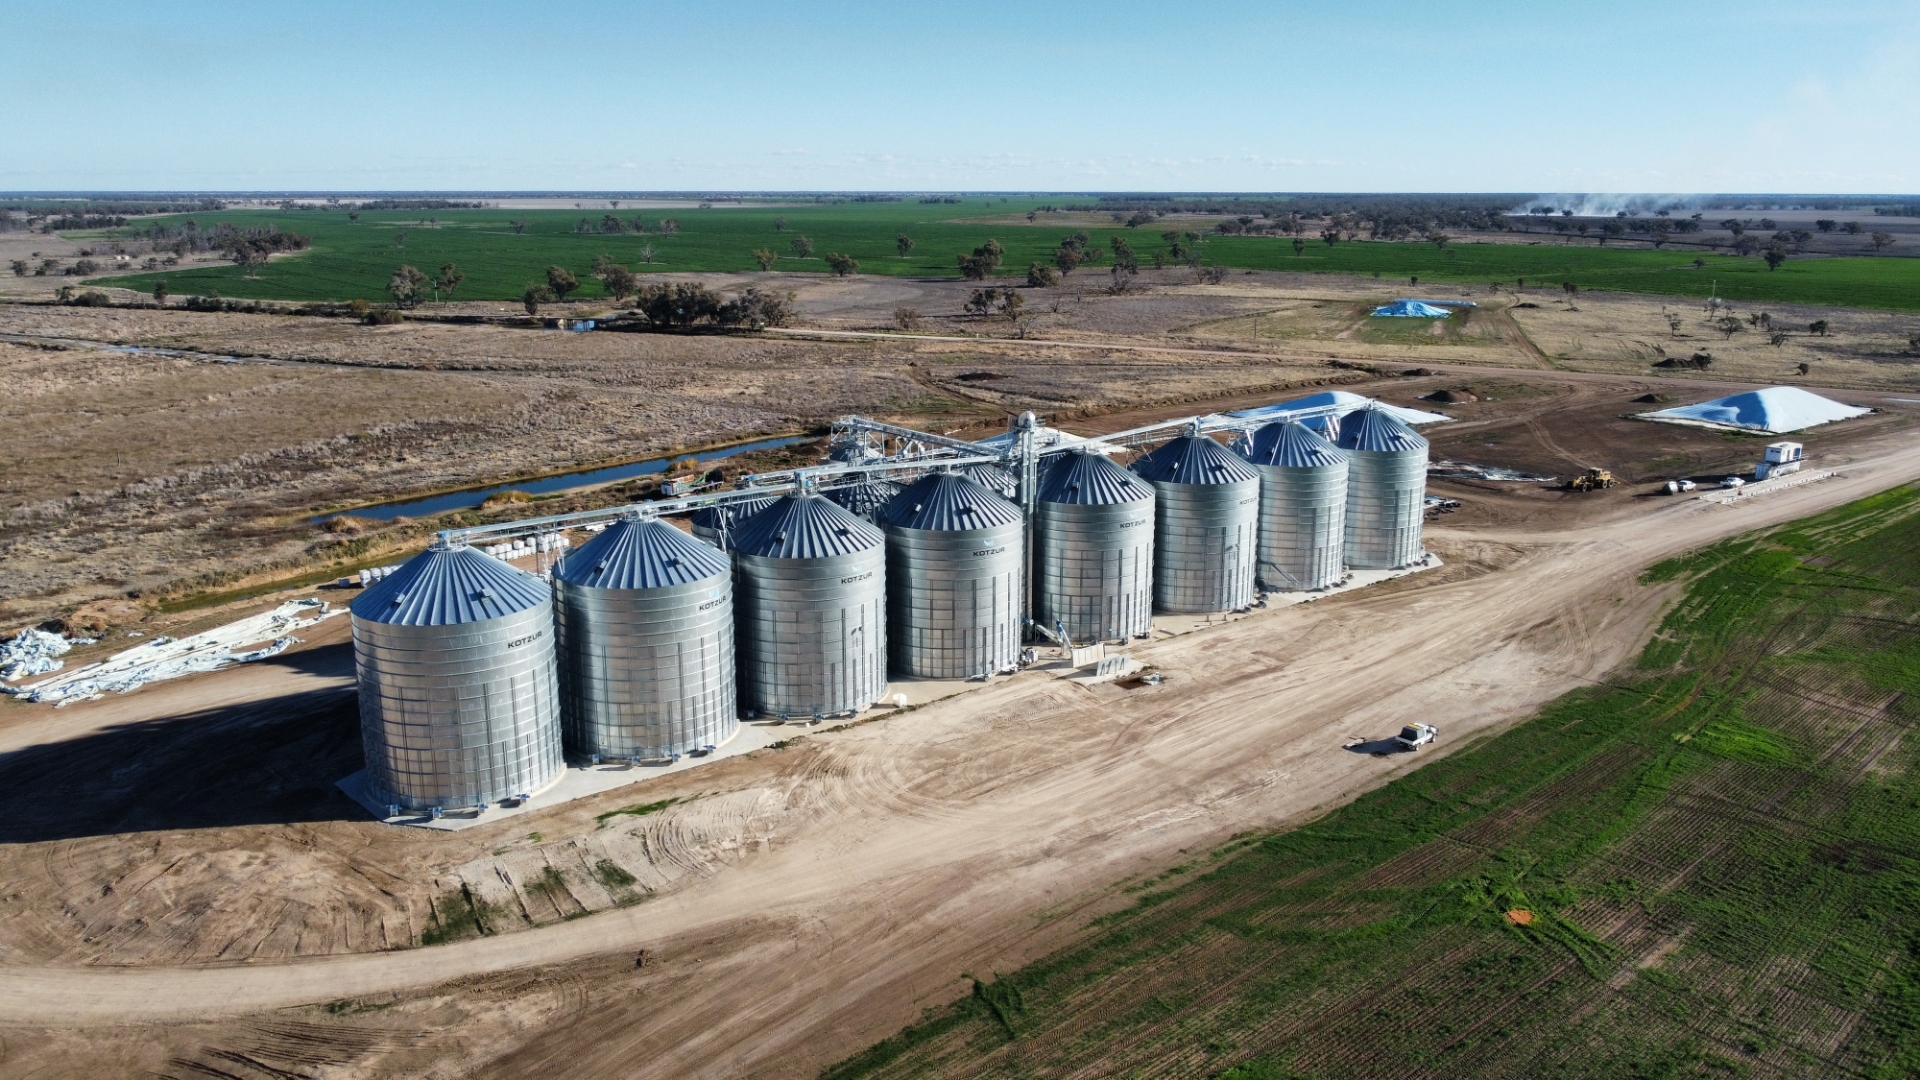 36,000T Storage, Handling and Outload Facility